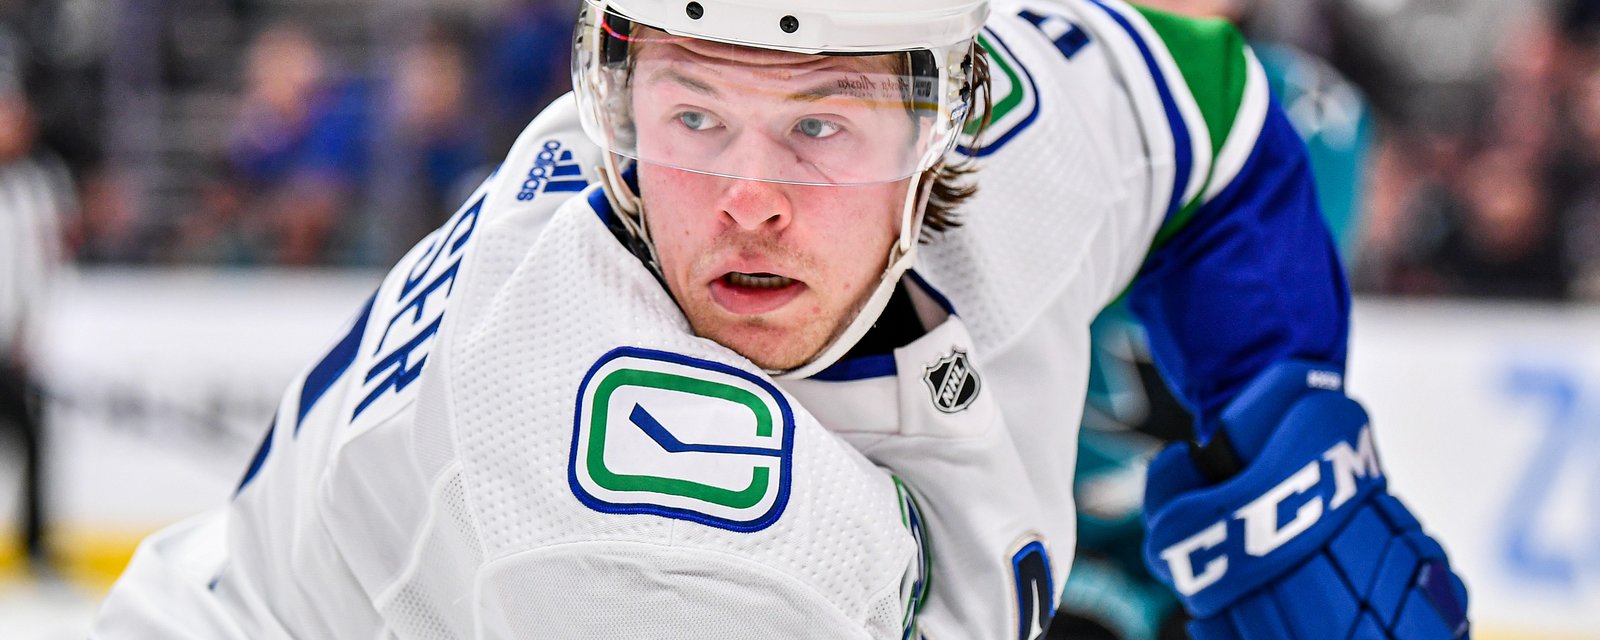 Canucks announce injuries to two player, including Brock Boeser